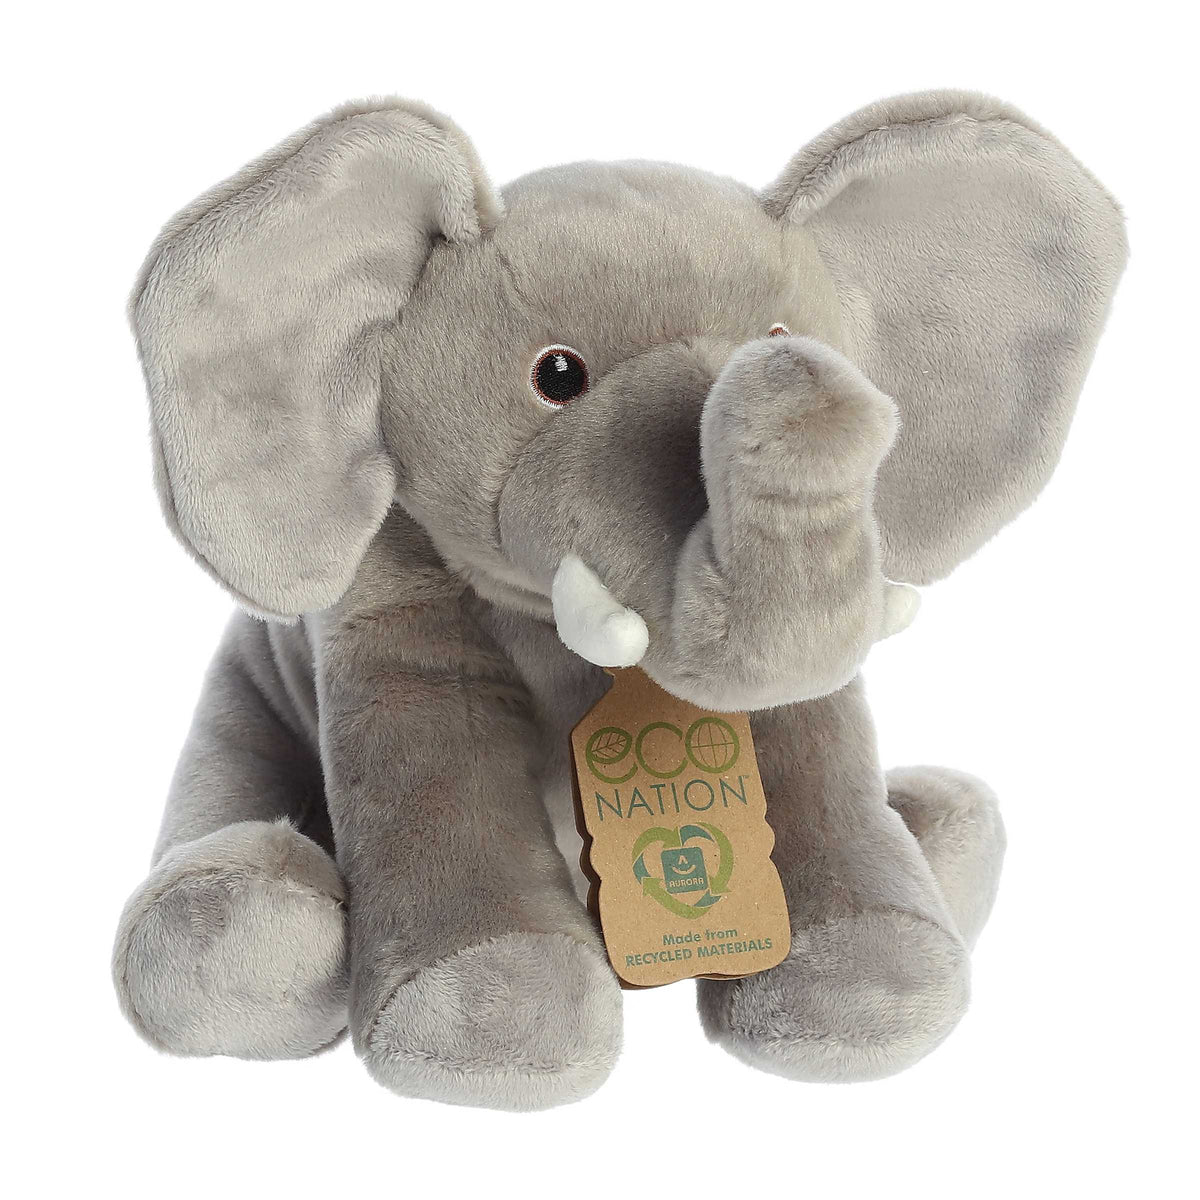 Eco Hugs Elephant plush by Aurora, made from recycled bottles, plush gray, with eco-friendly hang tag for eco-friendliness